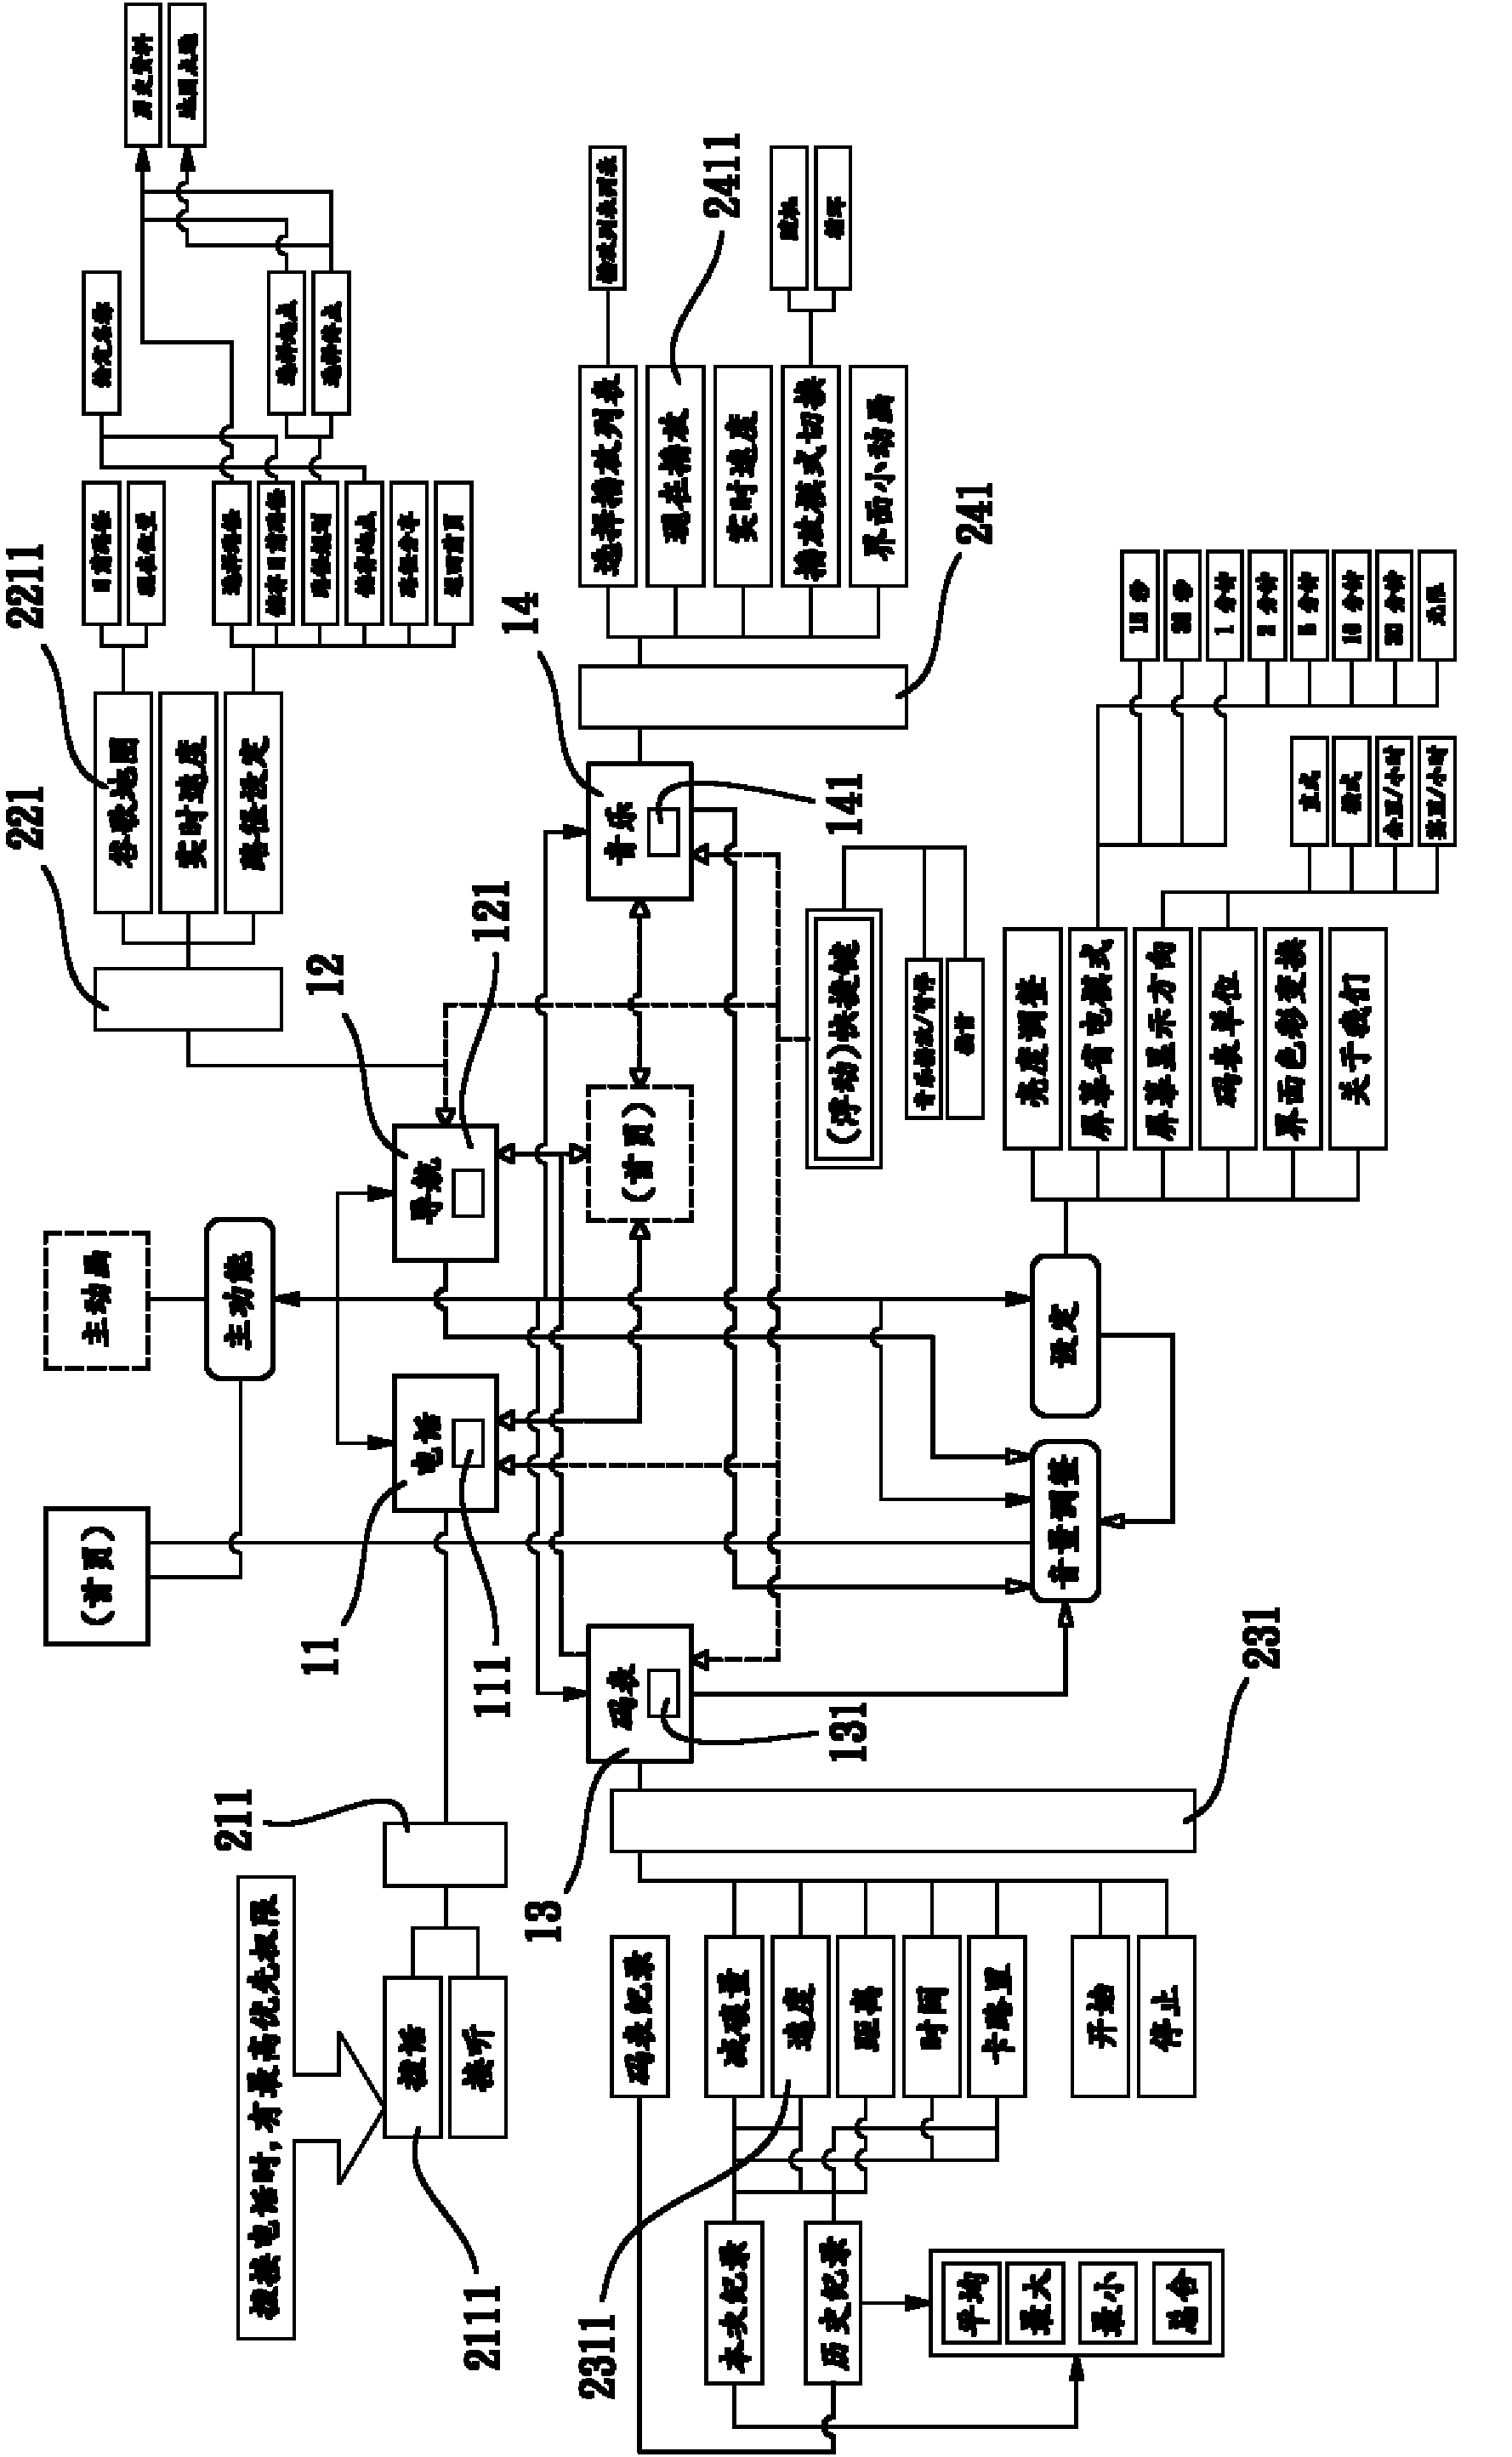 Operating device for combining intelligent mobile phone with bicycling